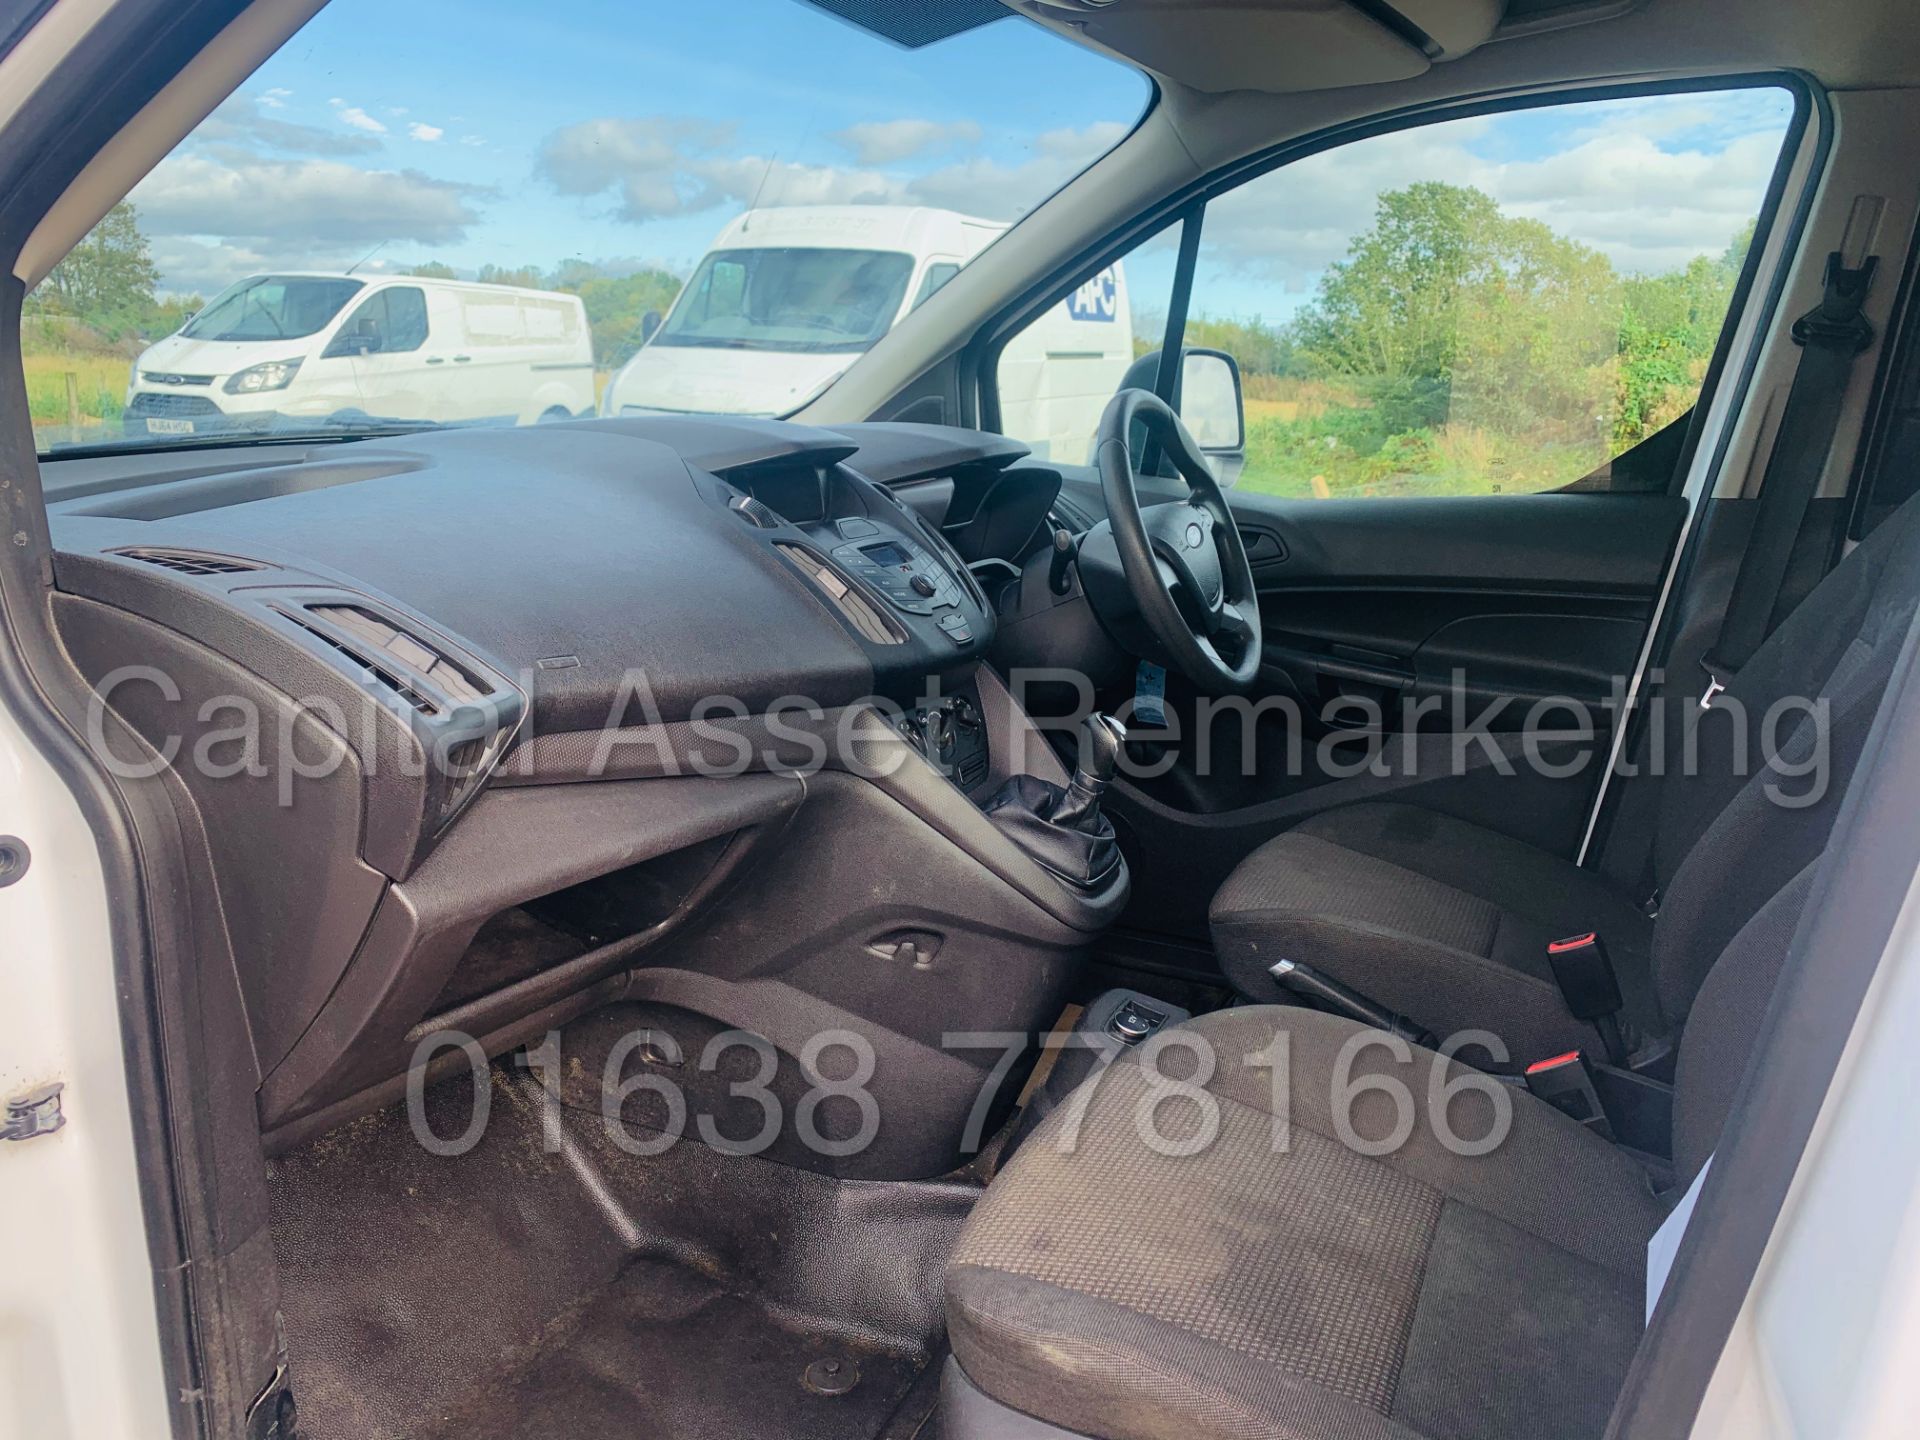 (ON SALE) FORD TRANSIT CONNECT *LWB - 5 SEATER CREW VAN* (2018 - EURO 6) 1.5 TDCI *A/C* (1 OWNER) - Image 19 of 40